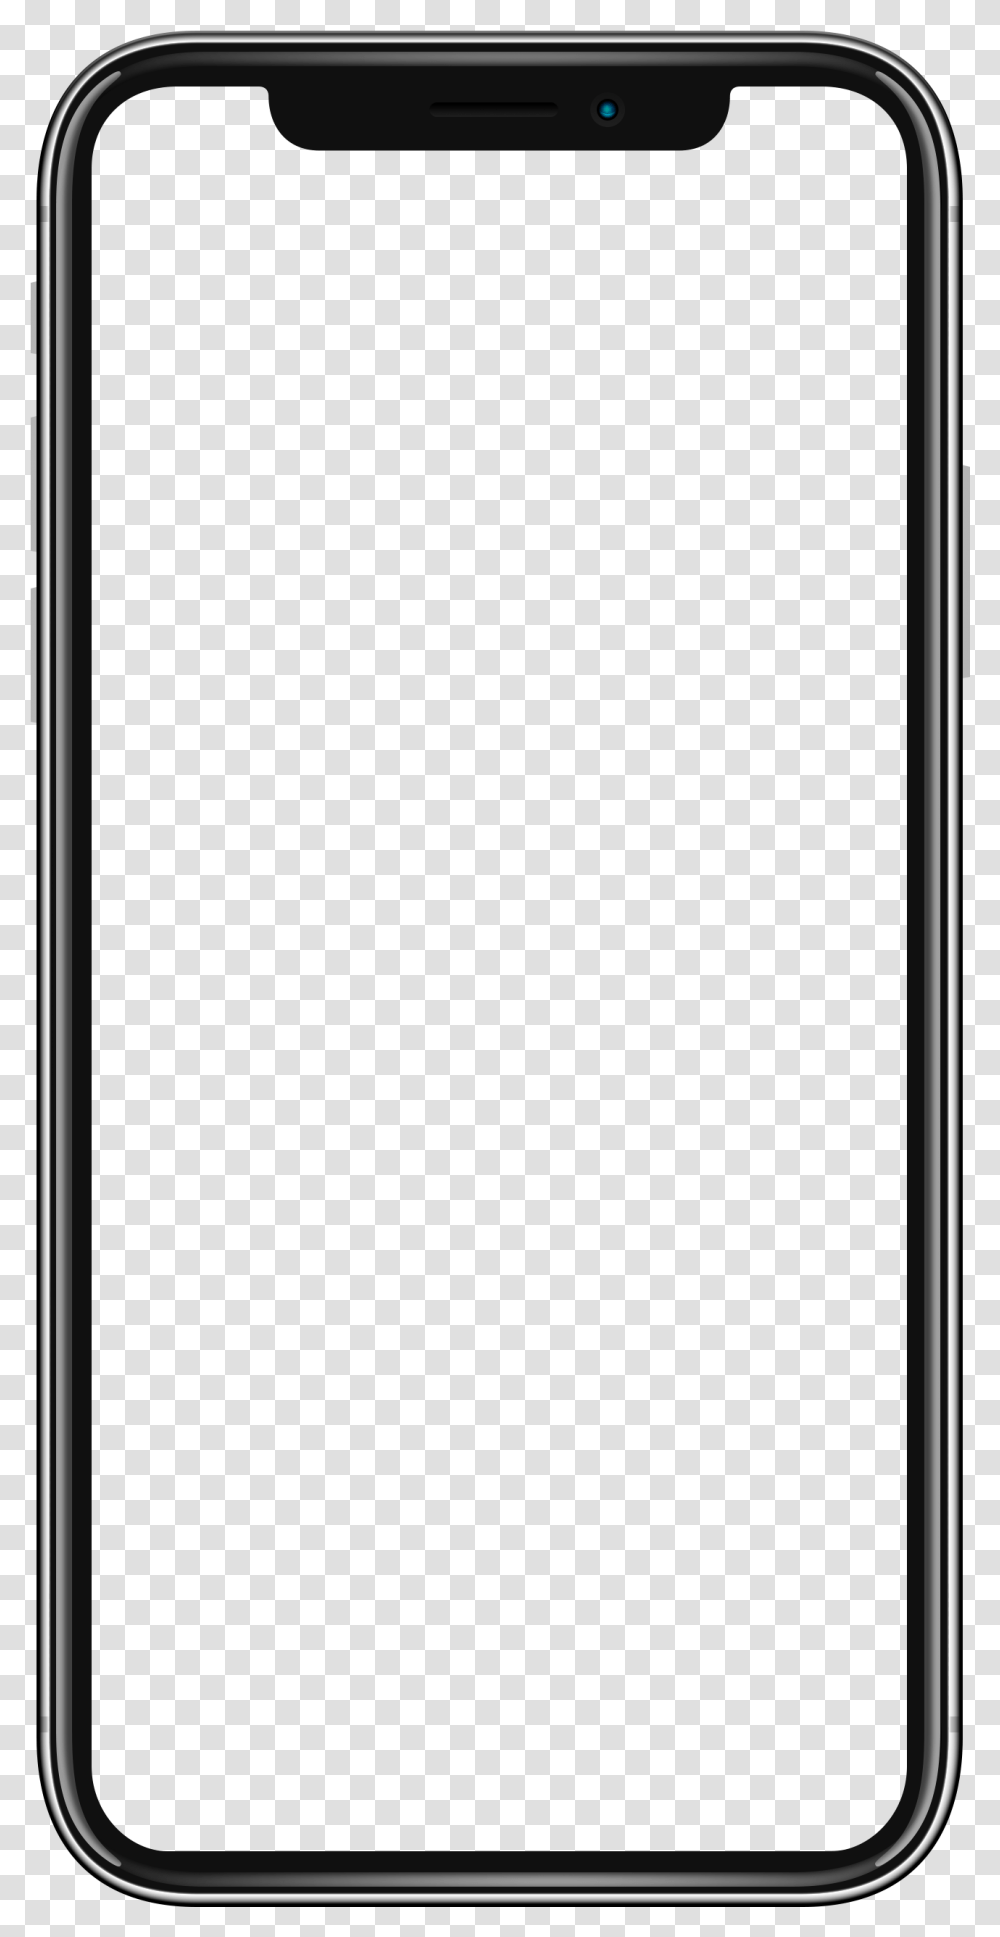 Mockup Iphone X Image Free Download Searchpng Iphone X Outline, Mobile Phone, Electronics, Cell Phone Transparent Png